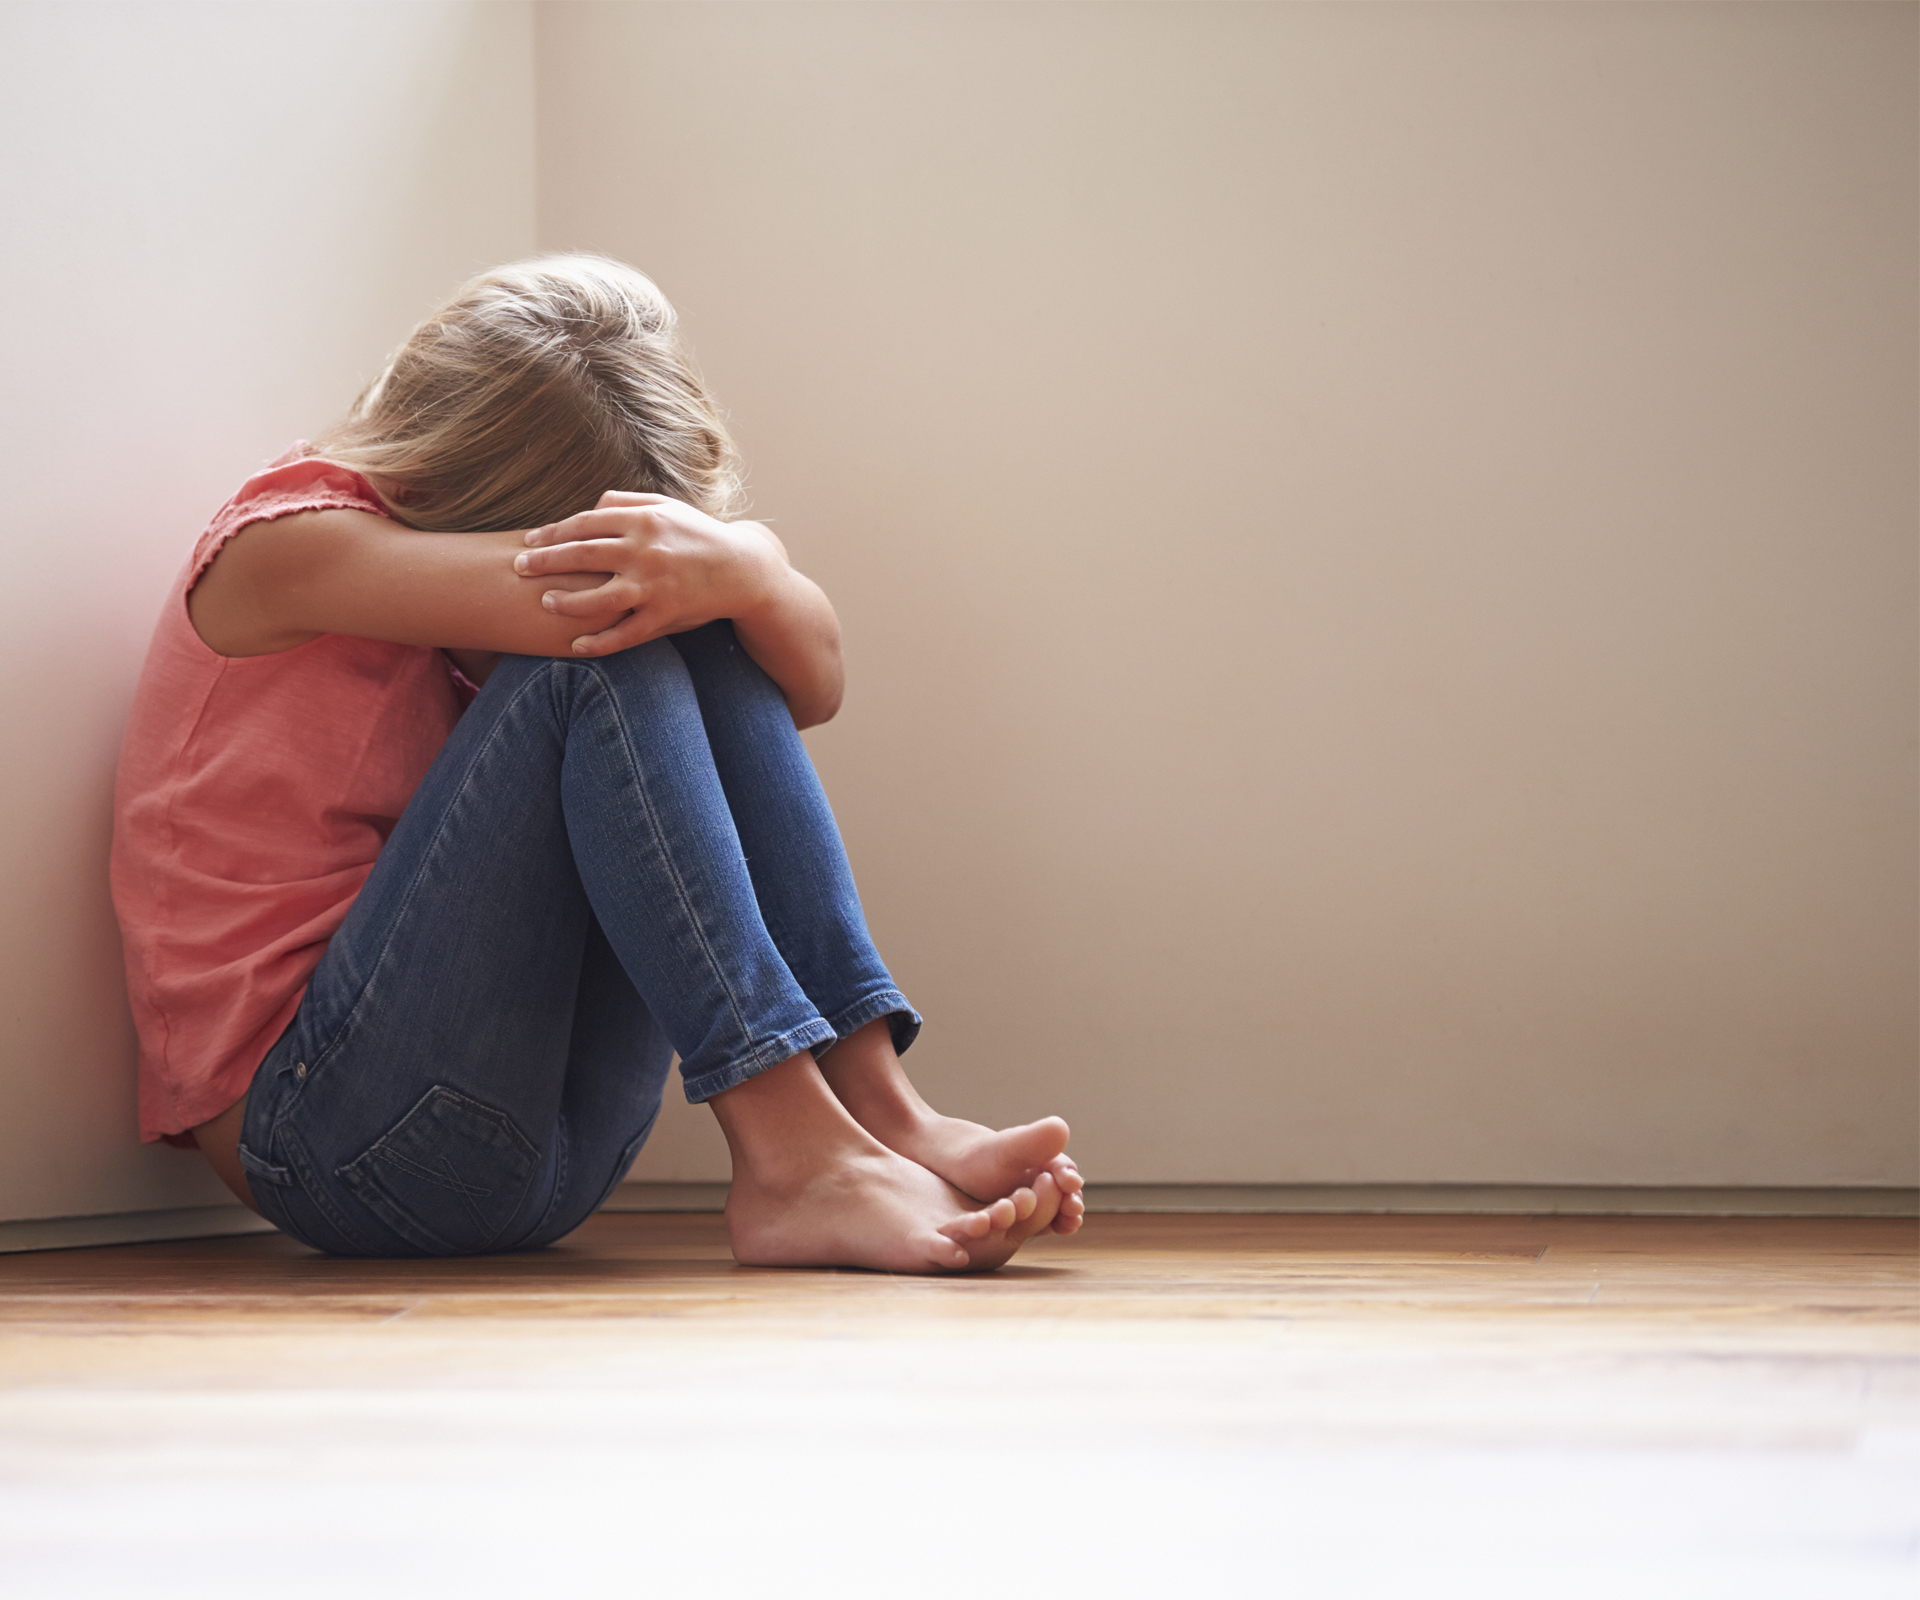 Emotional abuse is as harmful as physical abuse, says new study